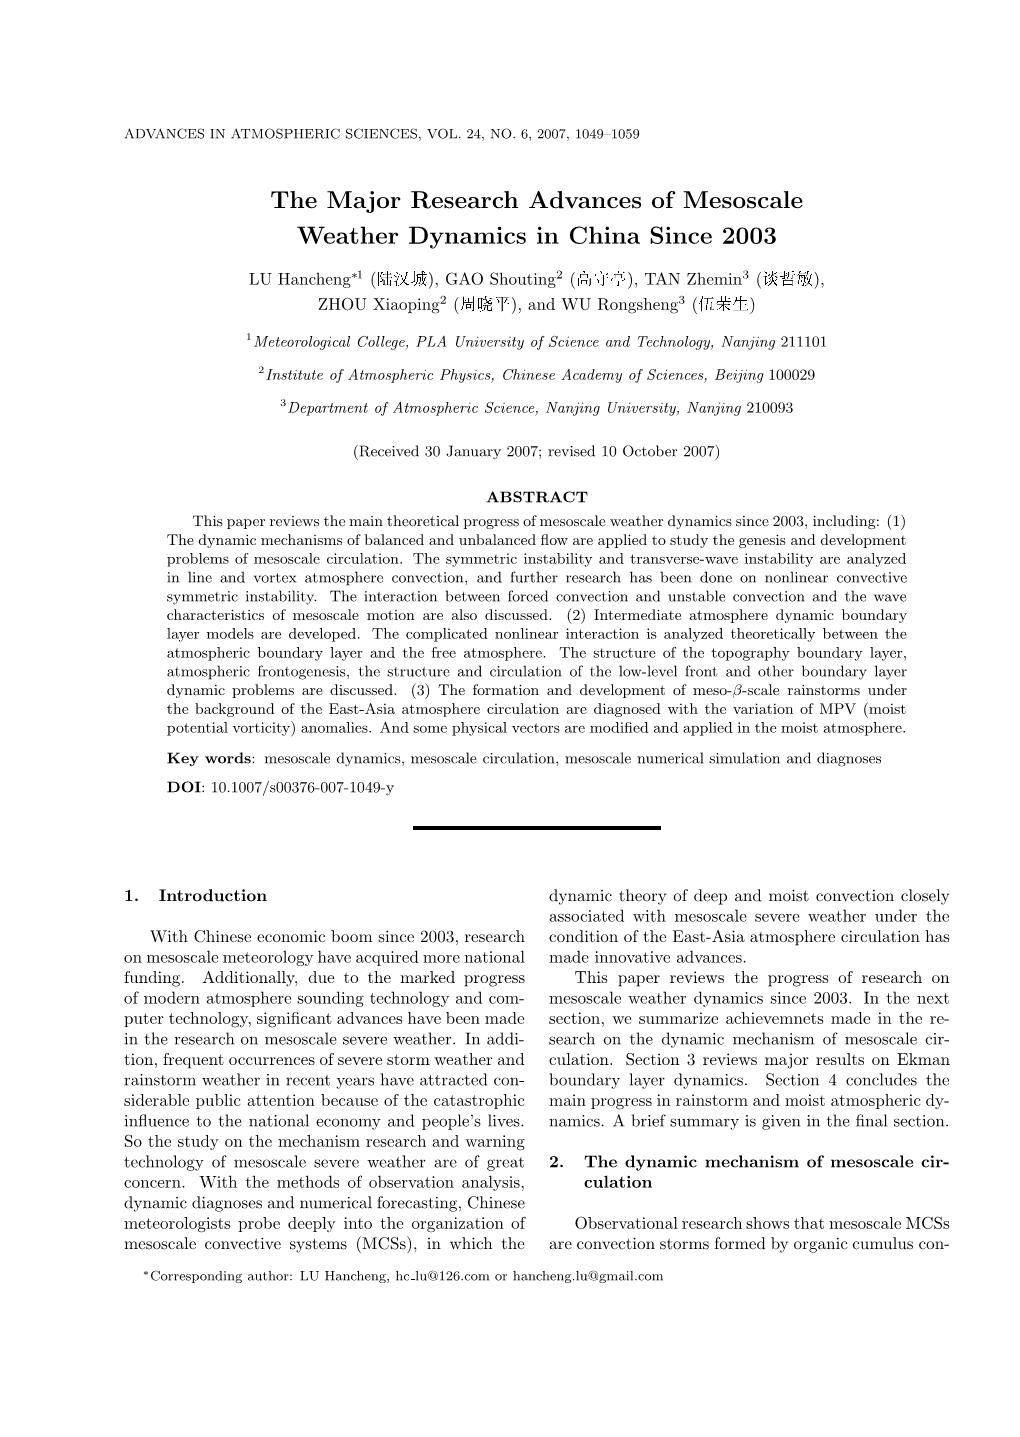 The Major Research Advances of Mesoscale Weather Dynamics in China Since 2003